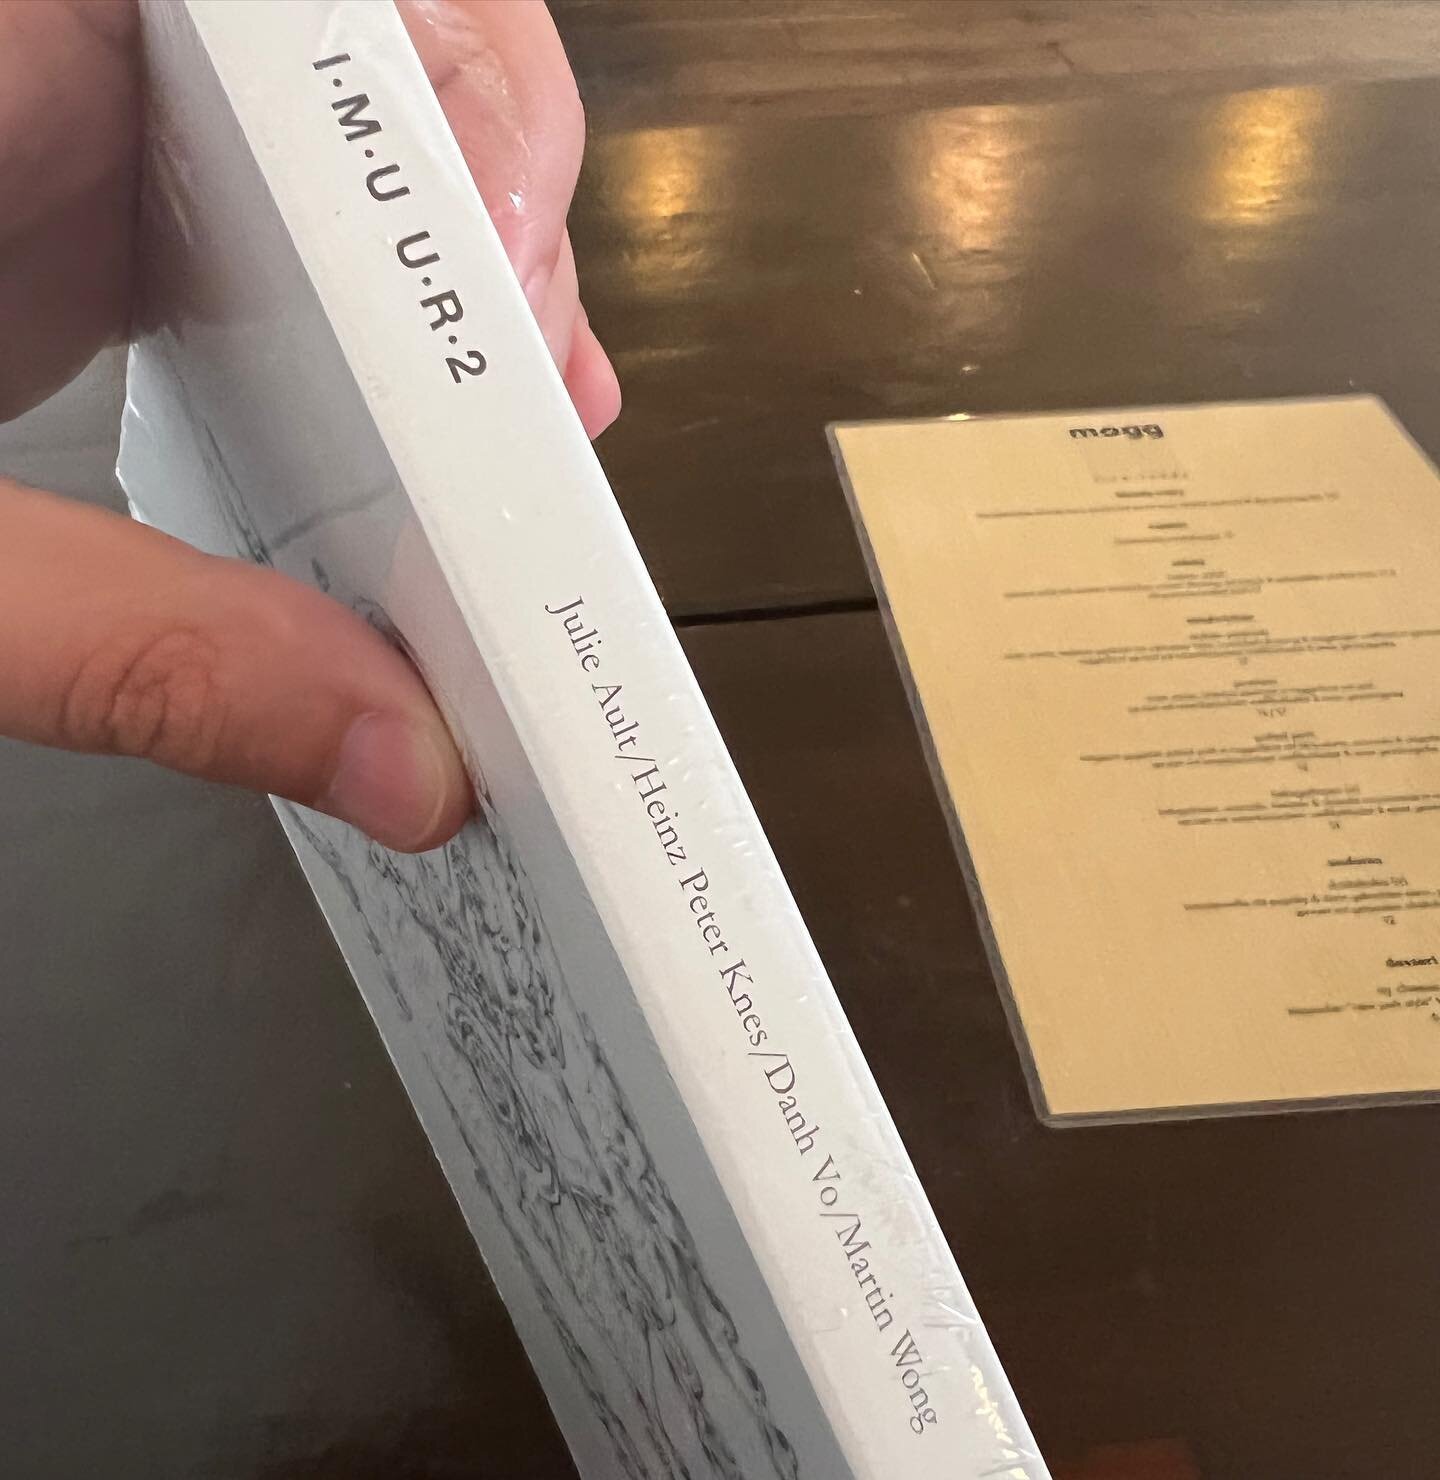 We found a copy of a much-coveted book, a catalogue of an exhibition at Buchholz with Julie Ault, Heinz Peter Knes, Dahn Vo, and Martin Wong.

Jackie tells me it&rsquo;s 3am back home, but you&rsquo;ve exactly 45 minutes to let me know you want the o